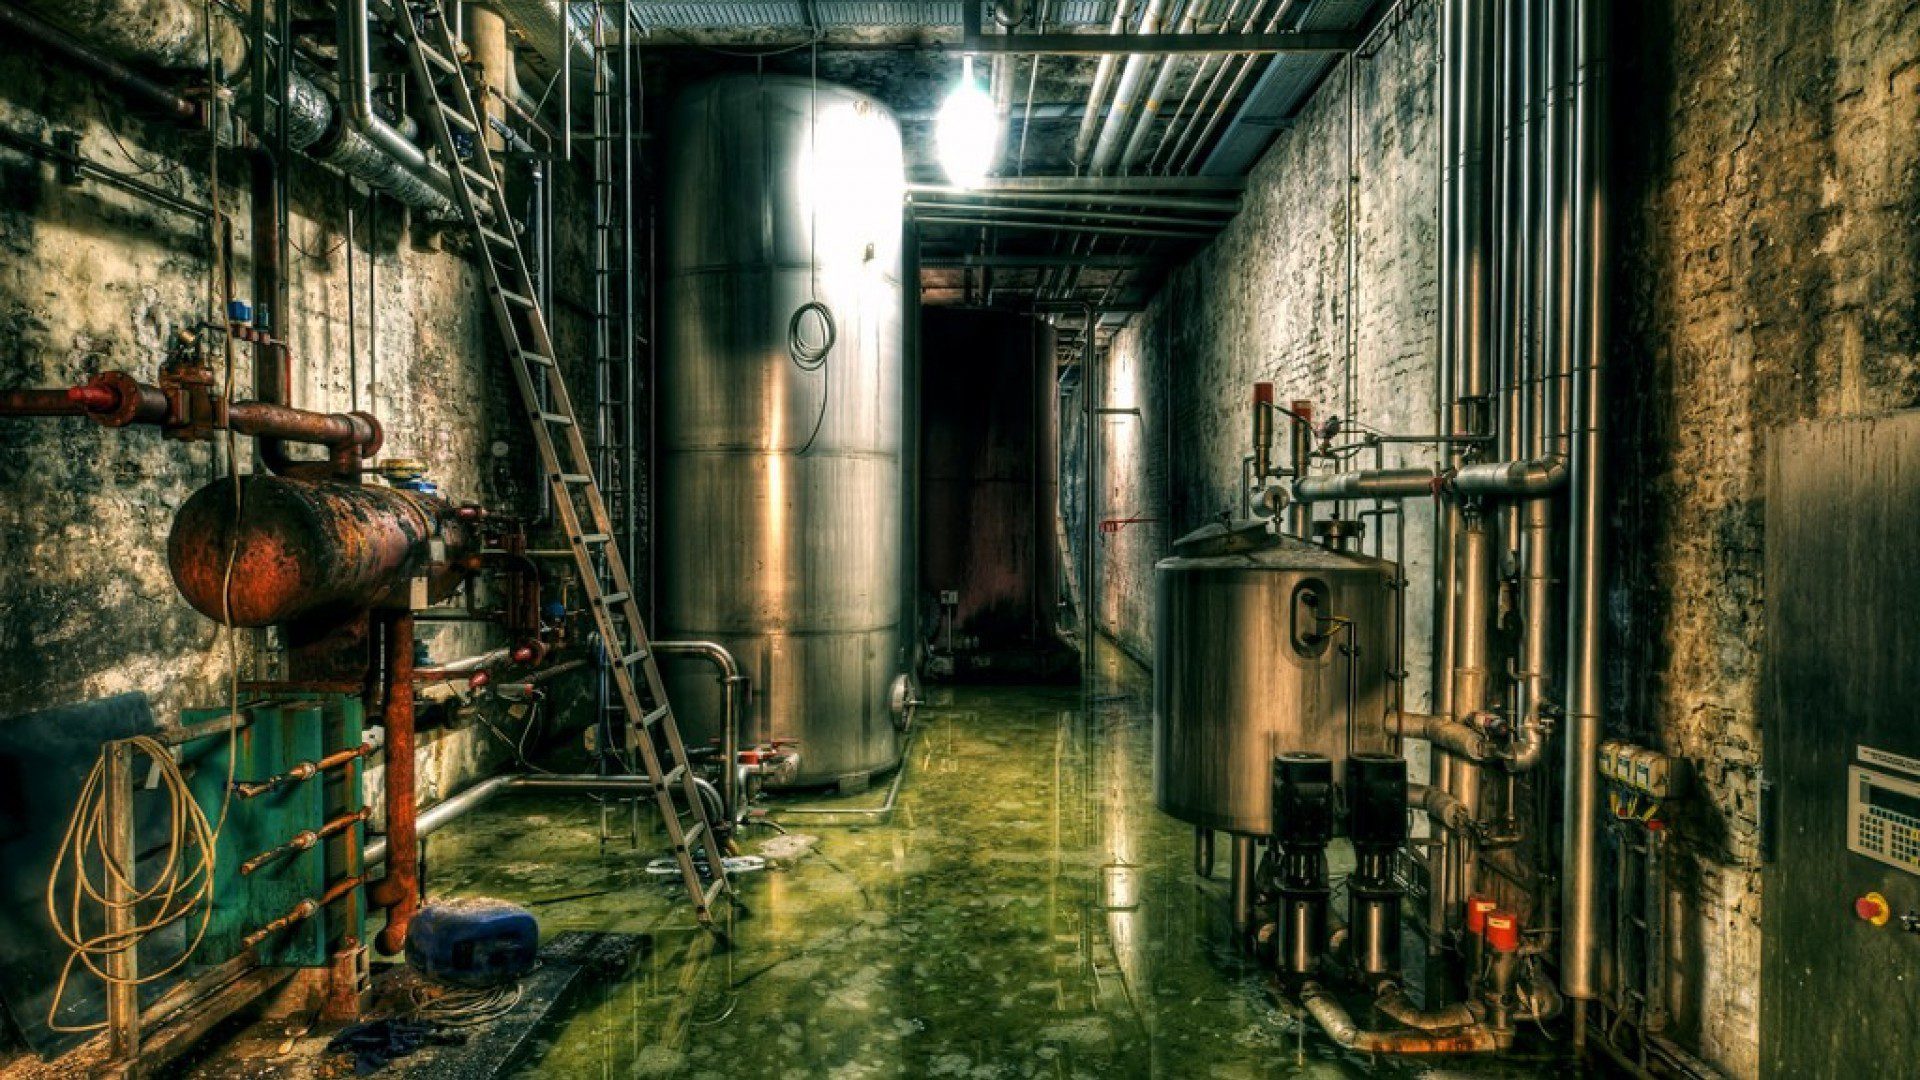 other flooded industrial basement water cityscapes urban abandoned industry mechanical flood desktop background images